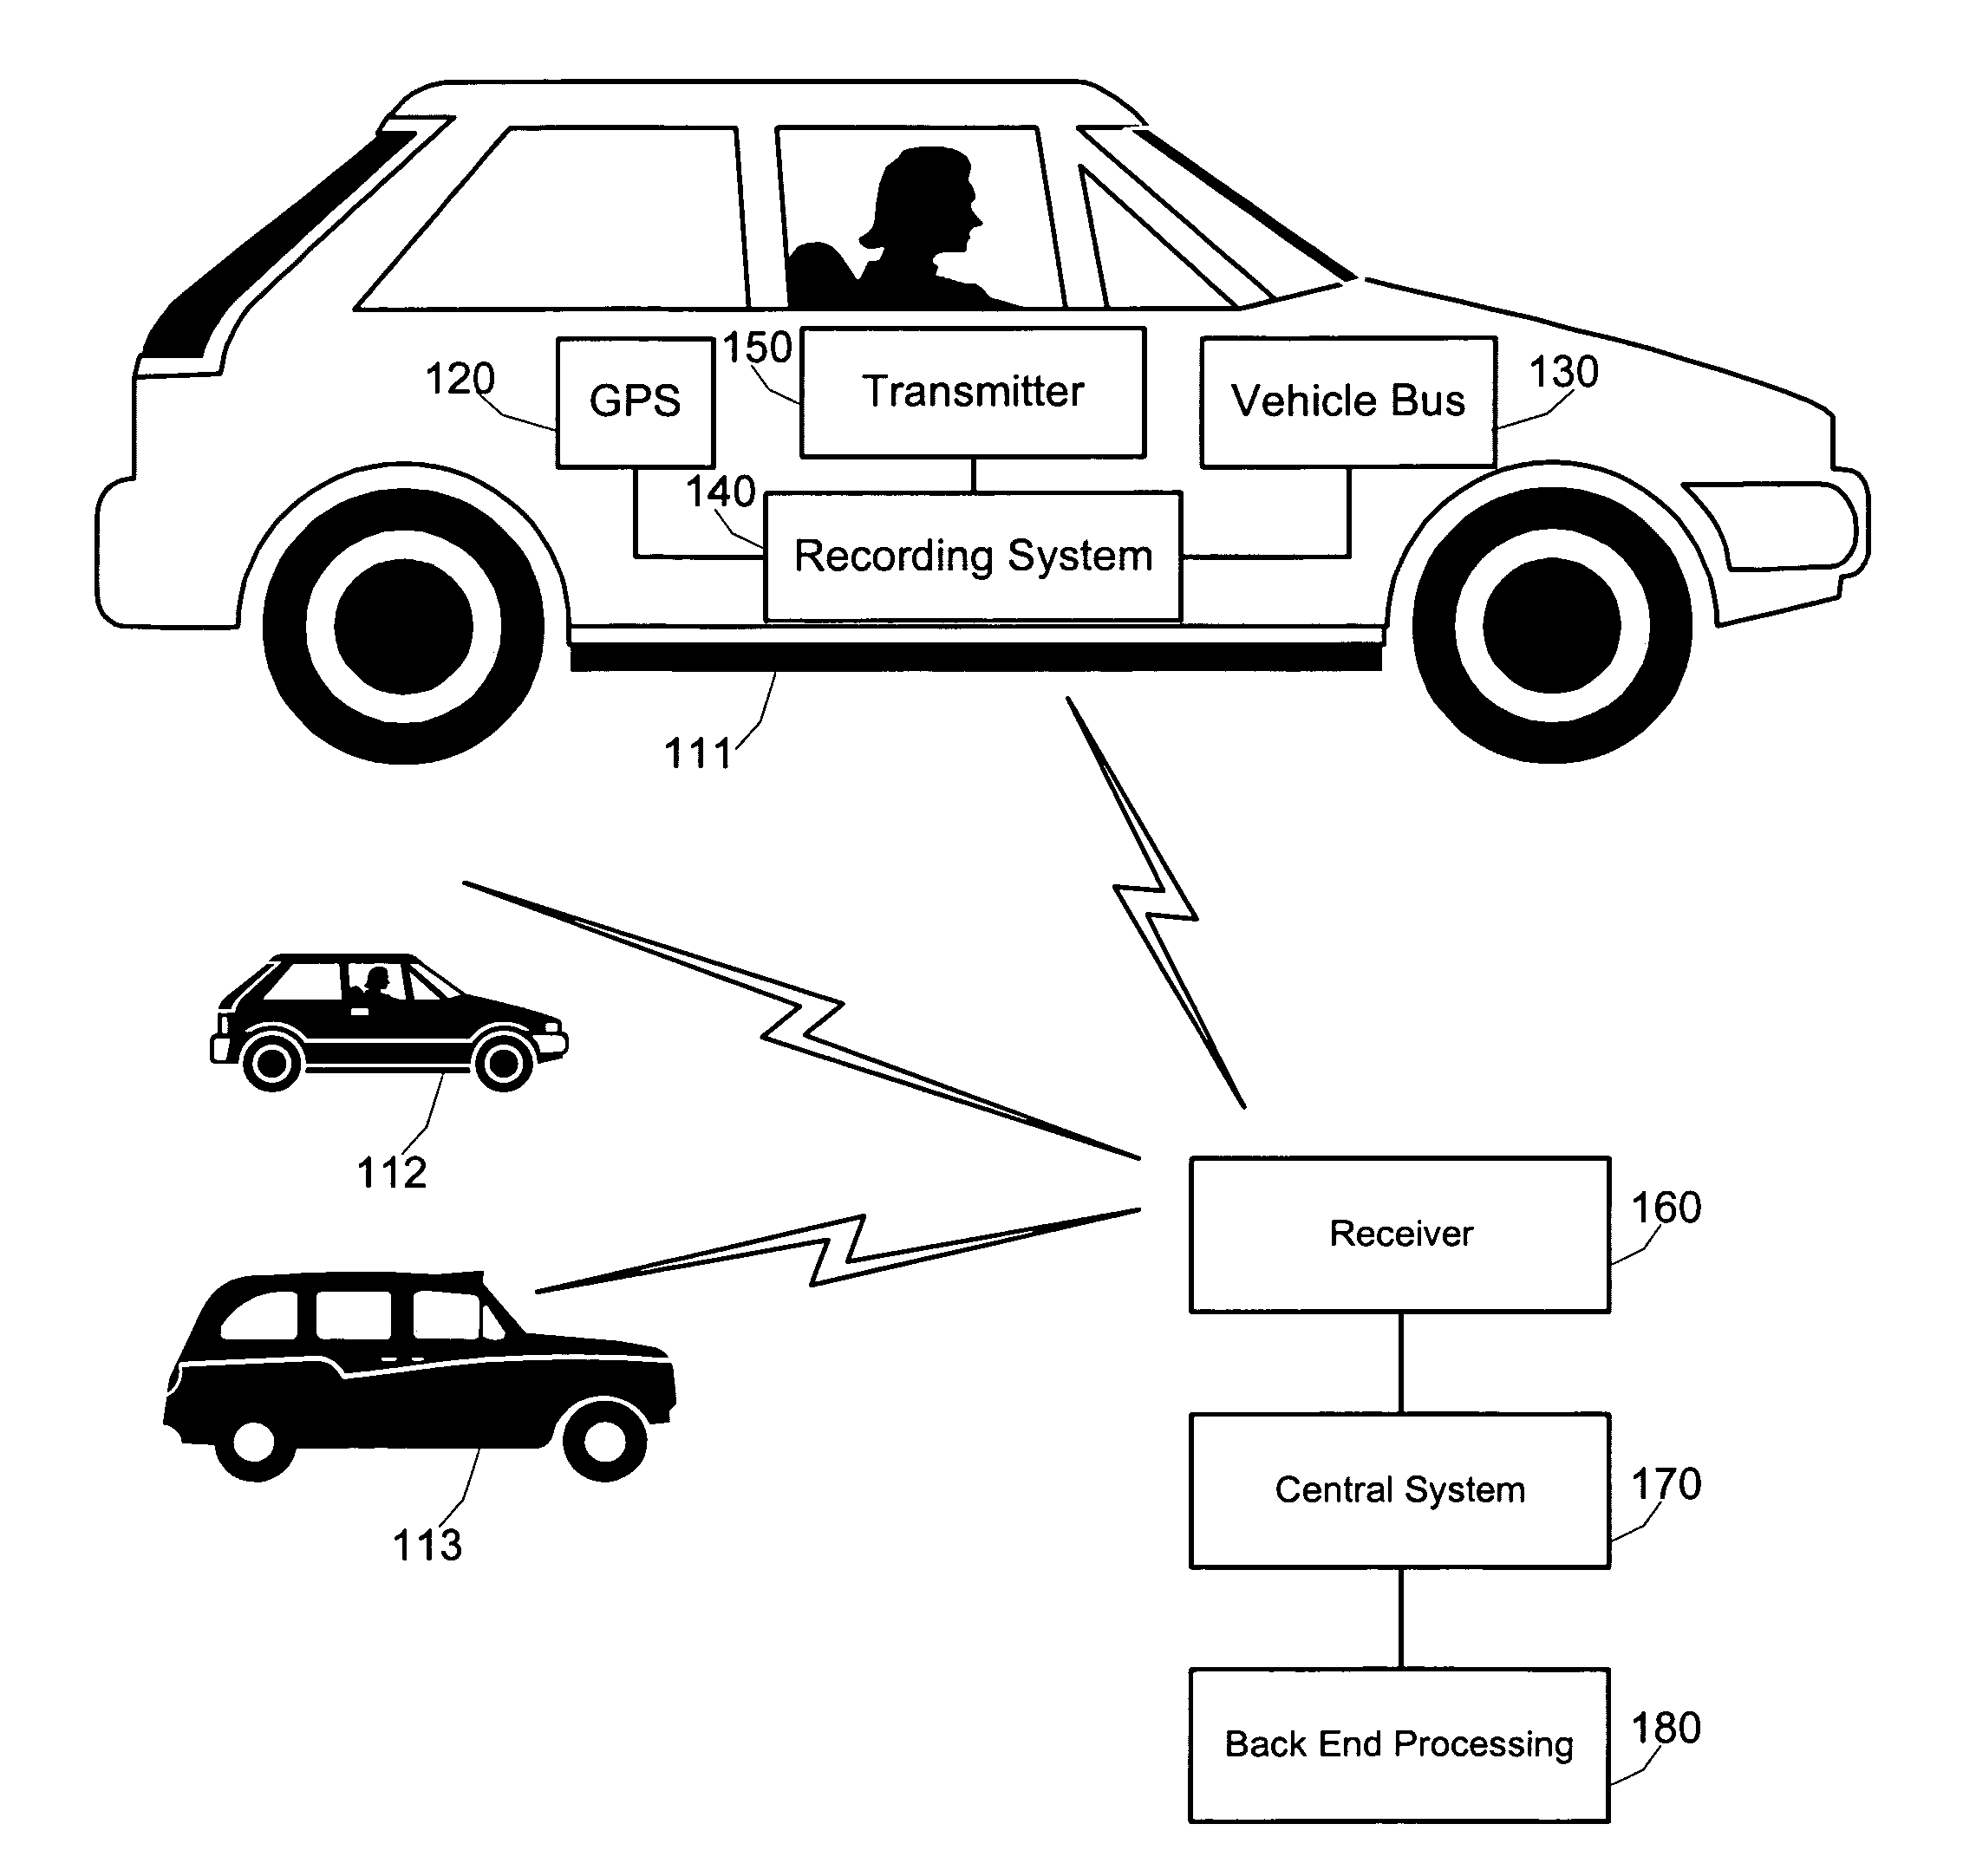 Calculation of driver score based on vehicle operation